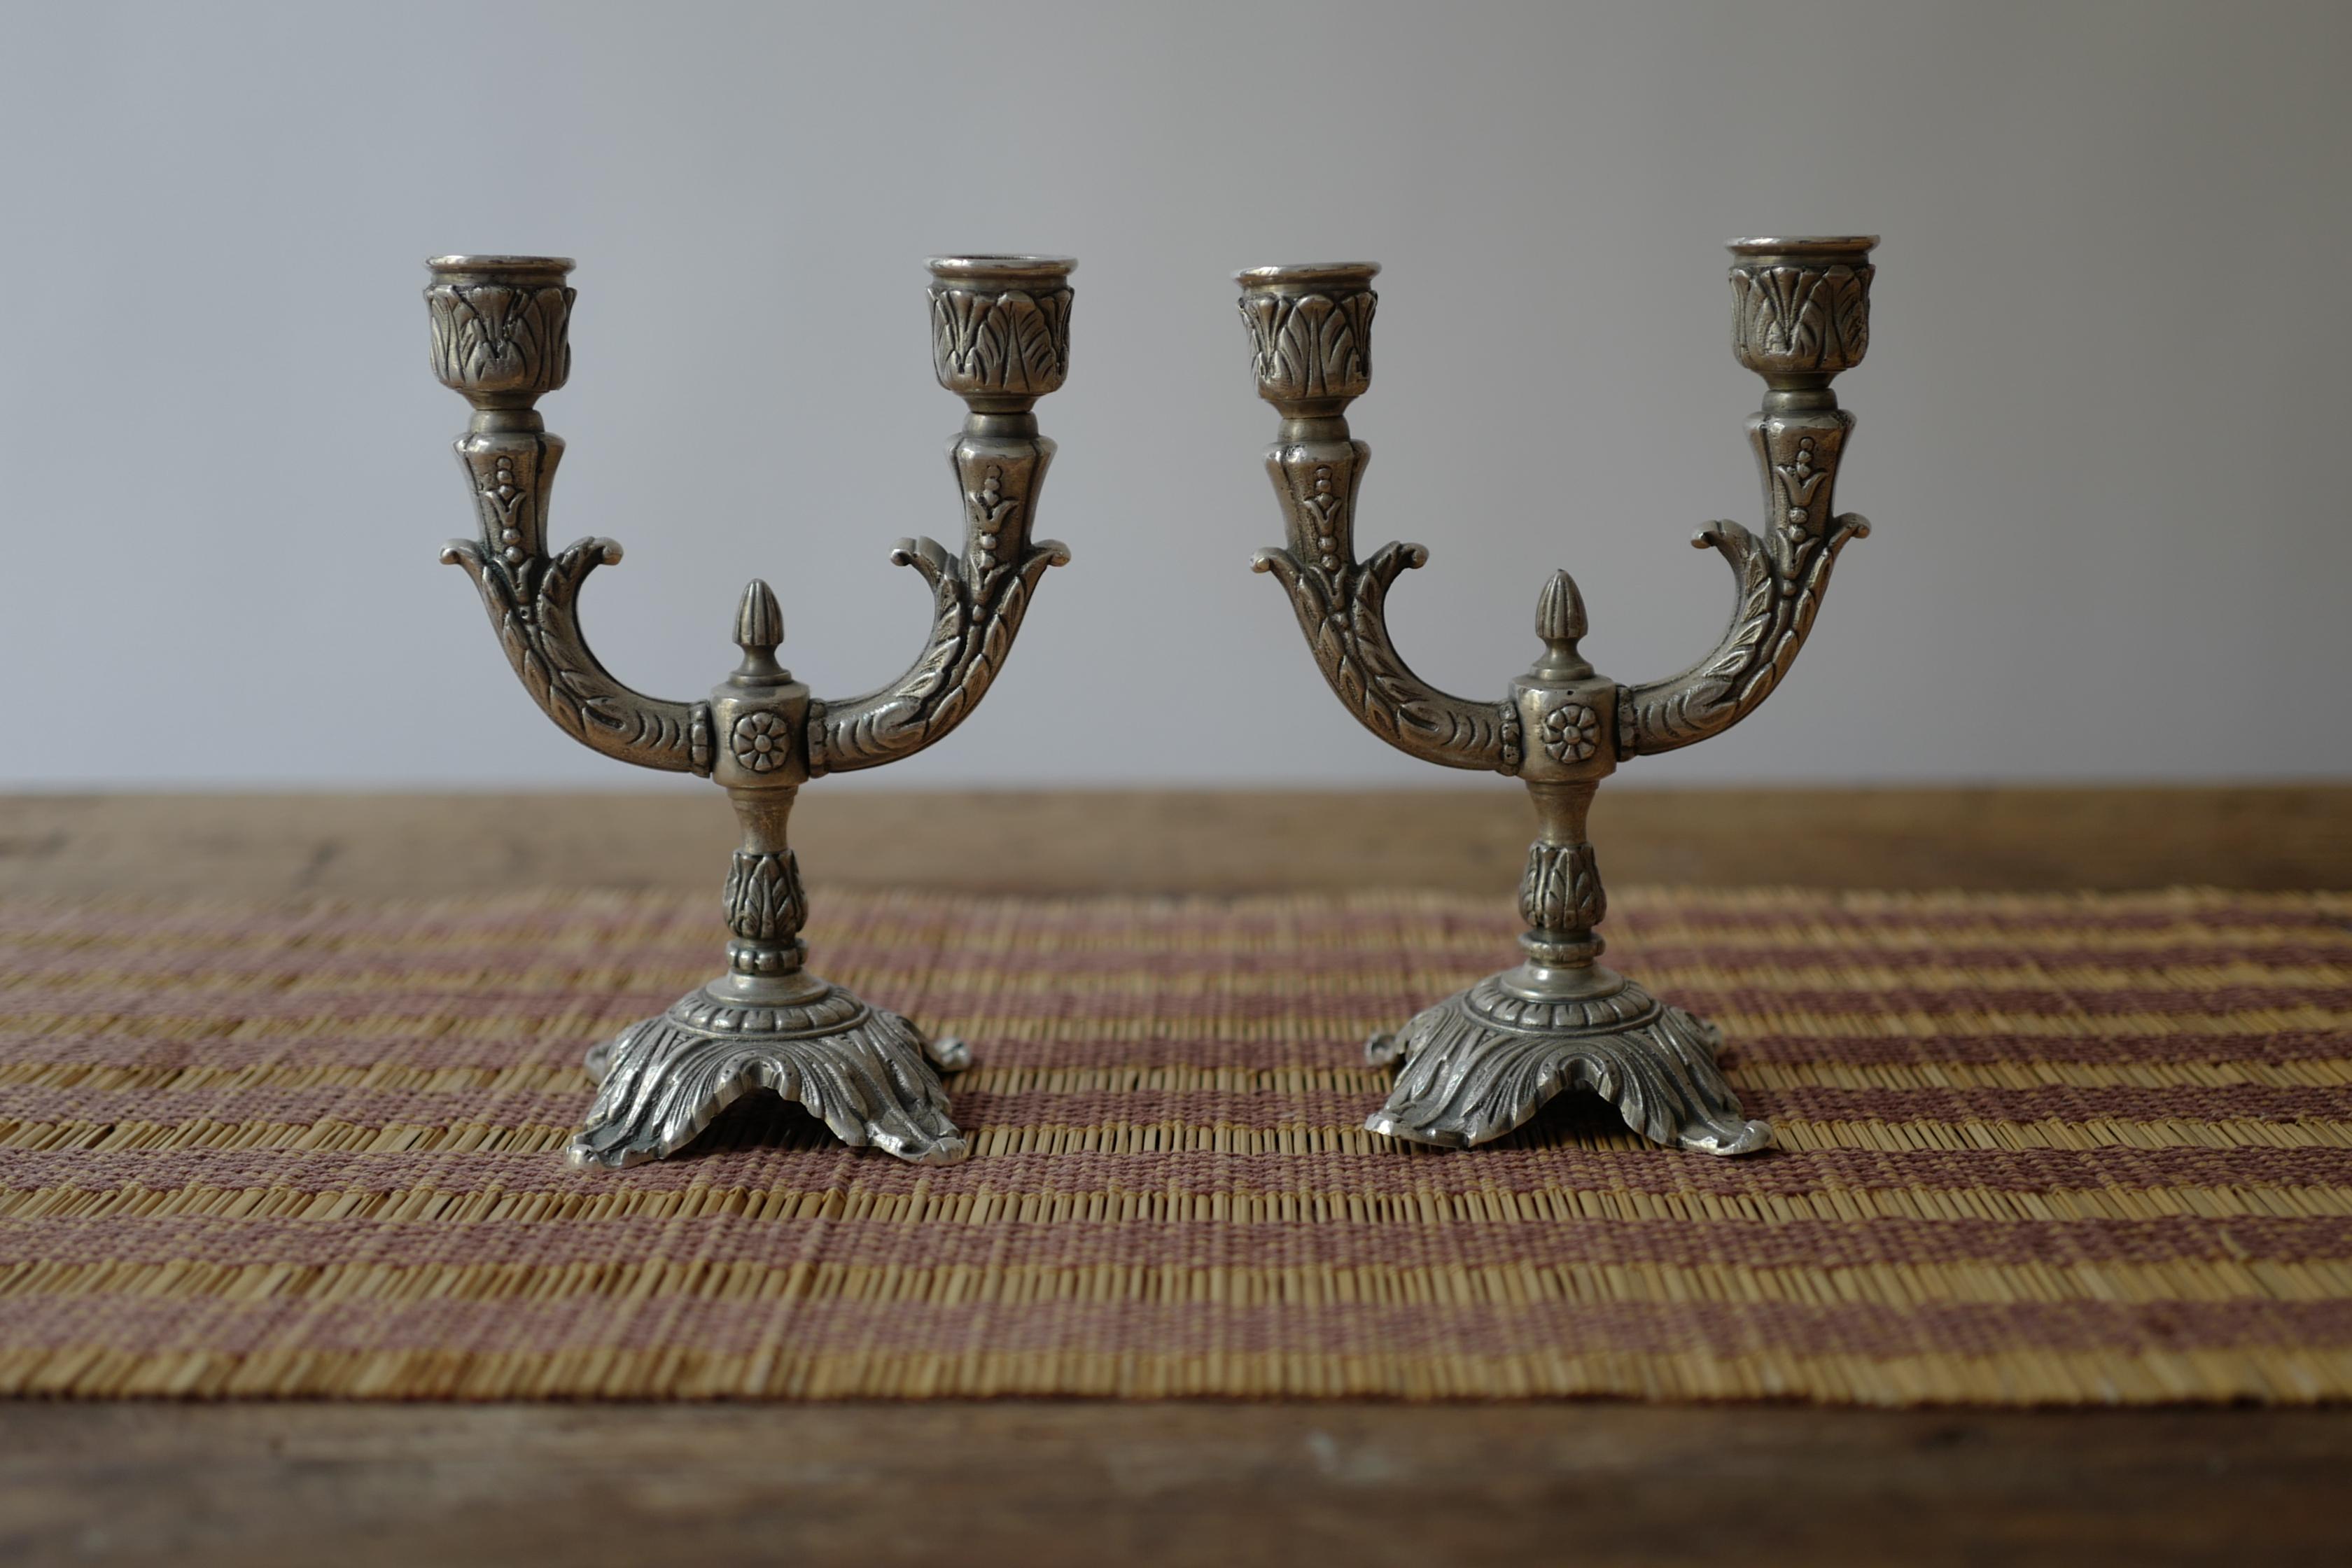 Pair of silver plated bronze french candlesticks with beautiful hand crafted decorative detail. Circa 19th Century. 